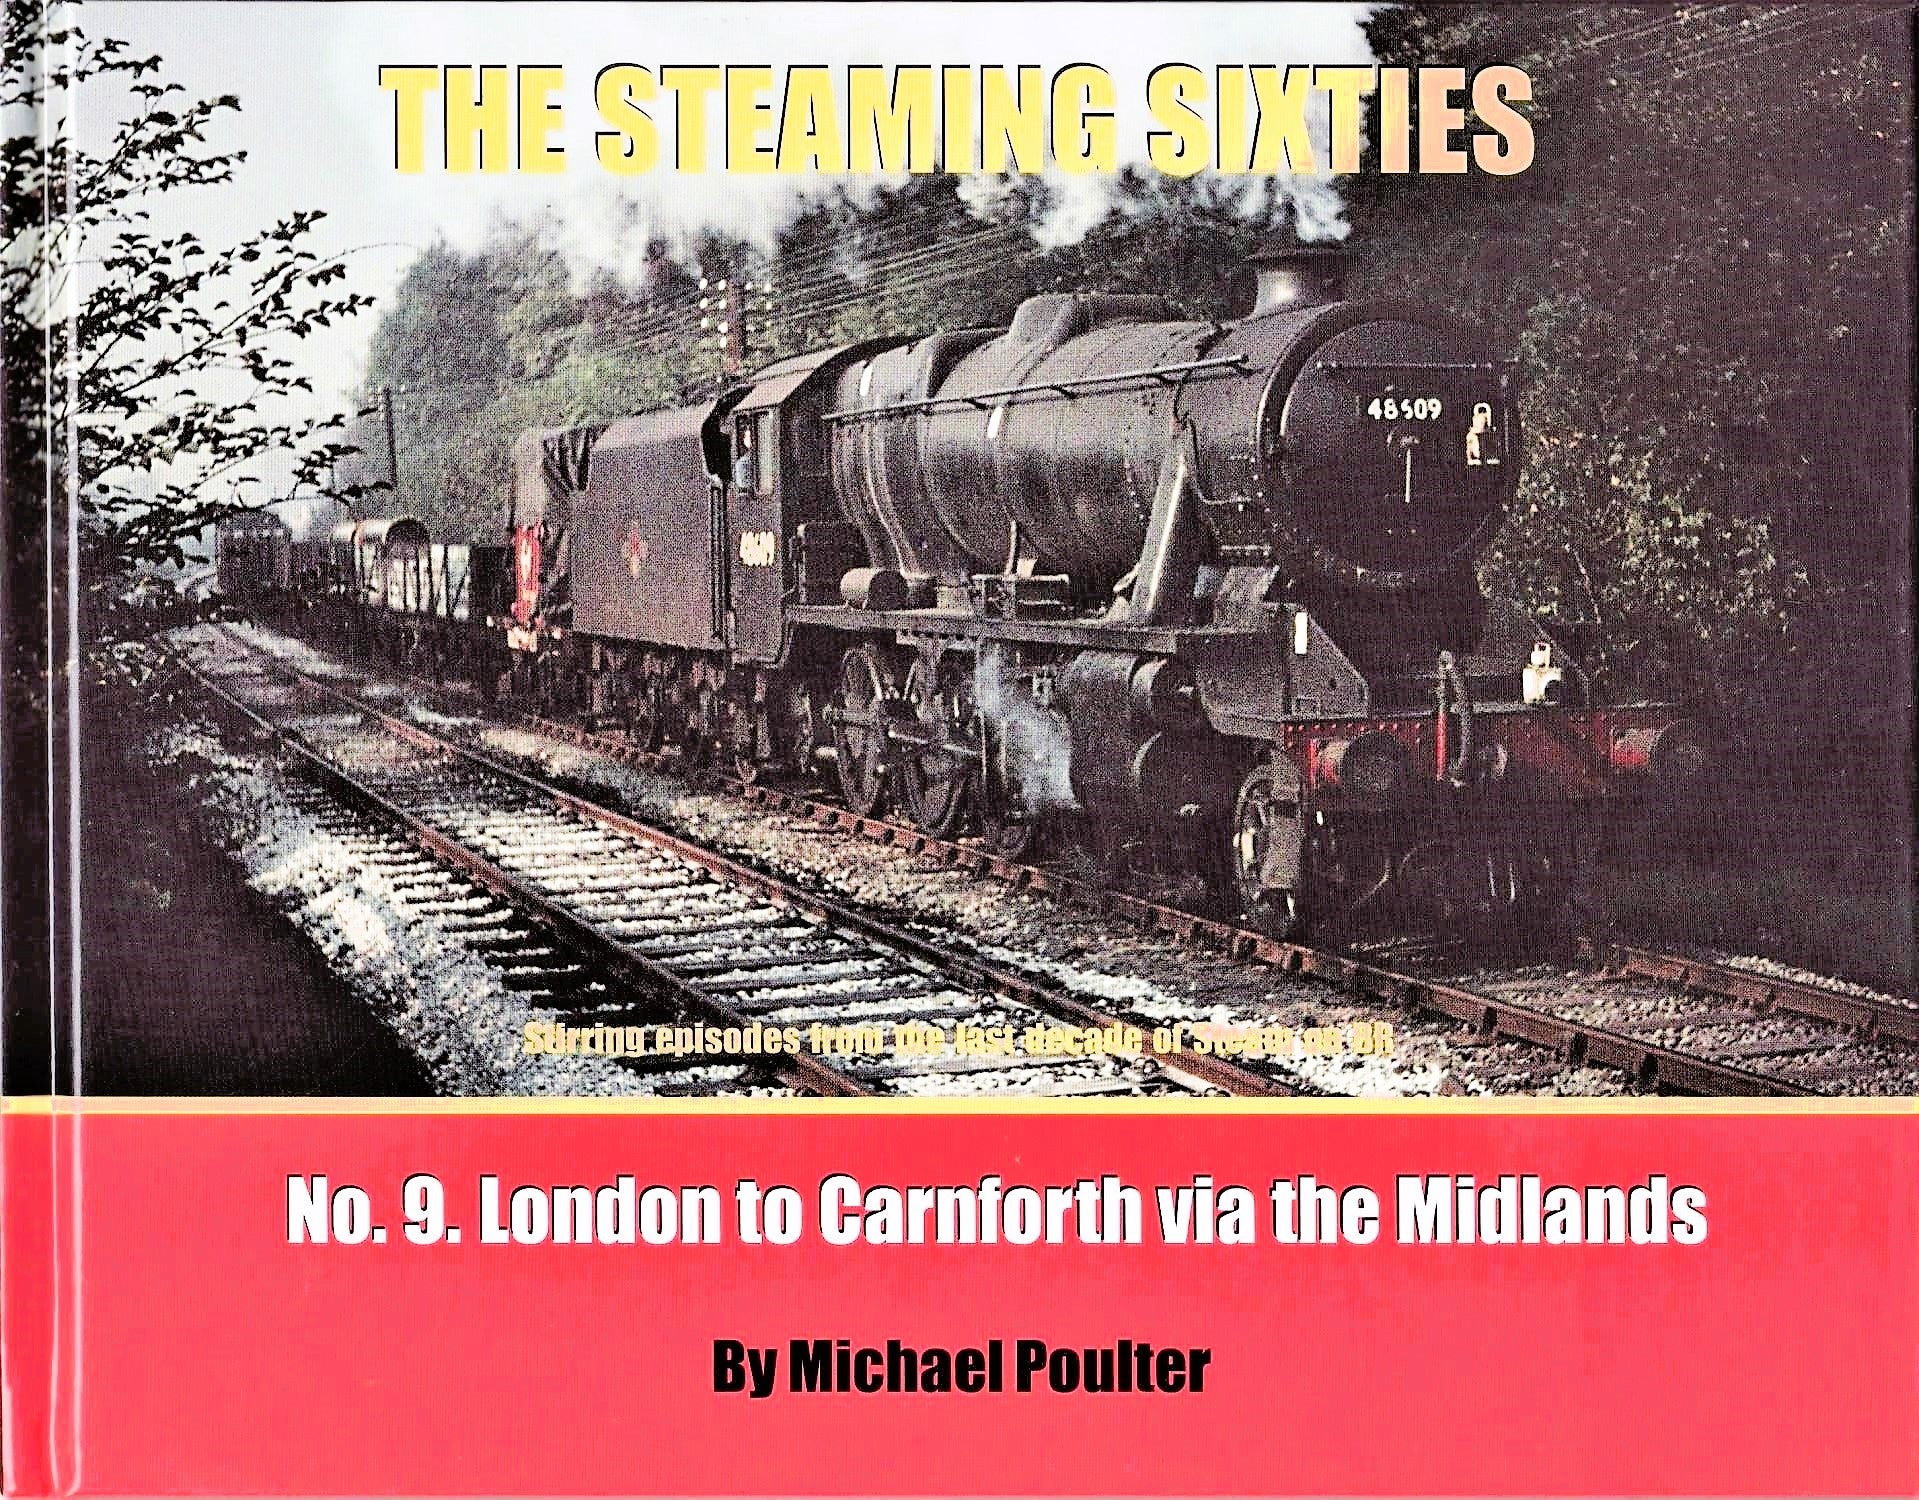 THE STEAMING SIXTIES No.9 Meandering Journeys Between London and Carnforth via Nottingham